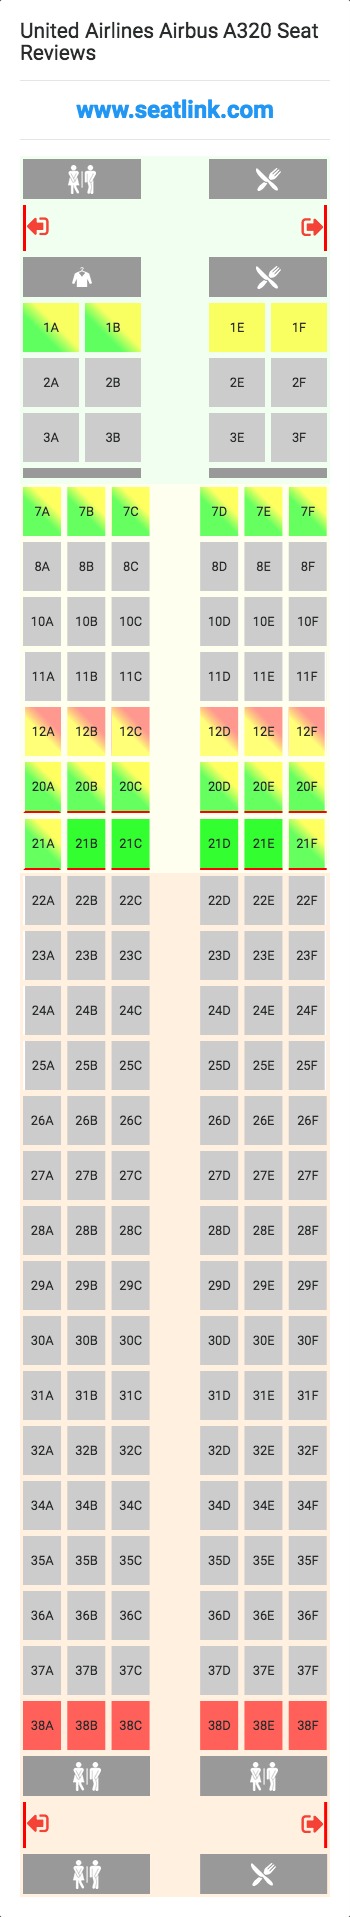 United Airlines Airbus A320 (320) Seat Map